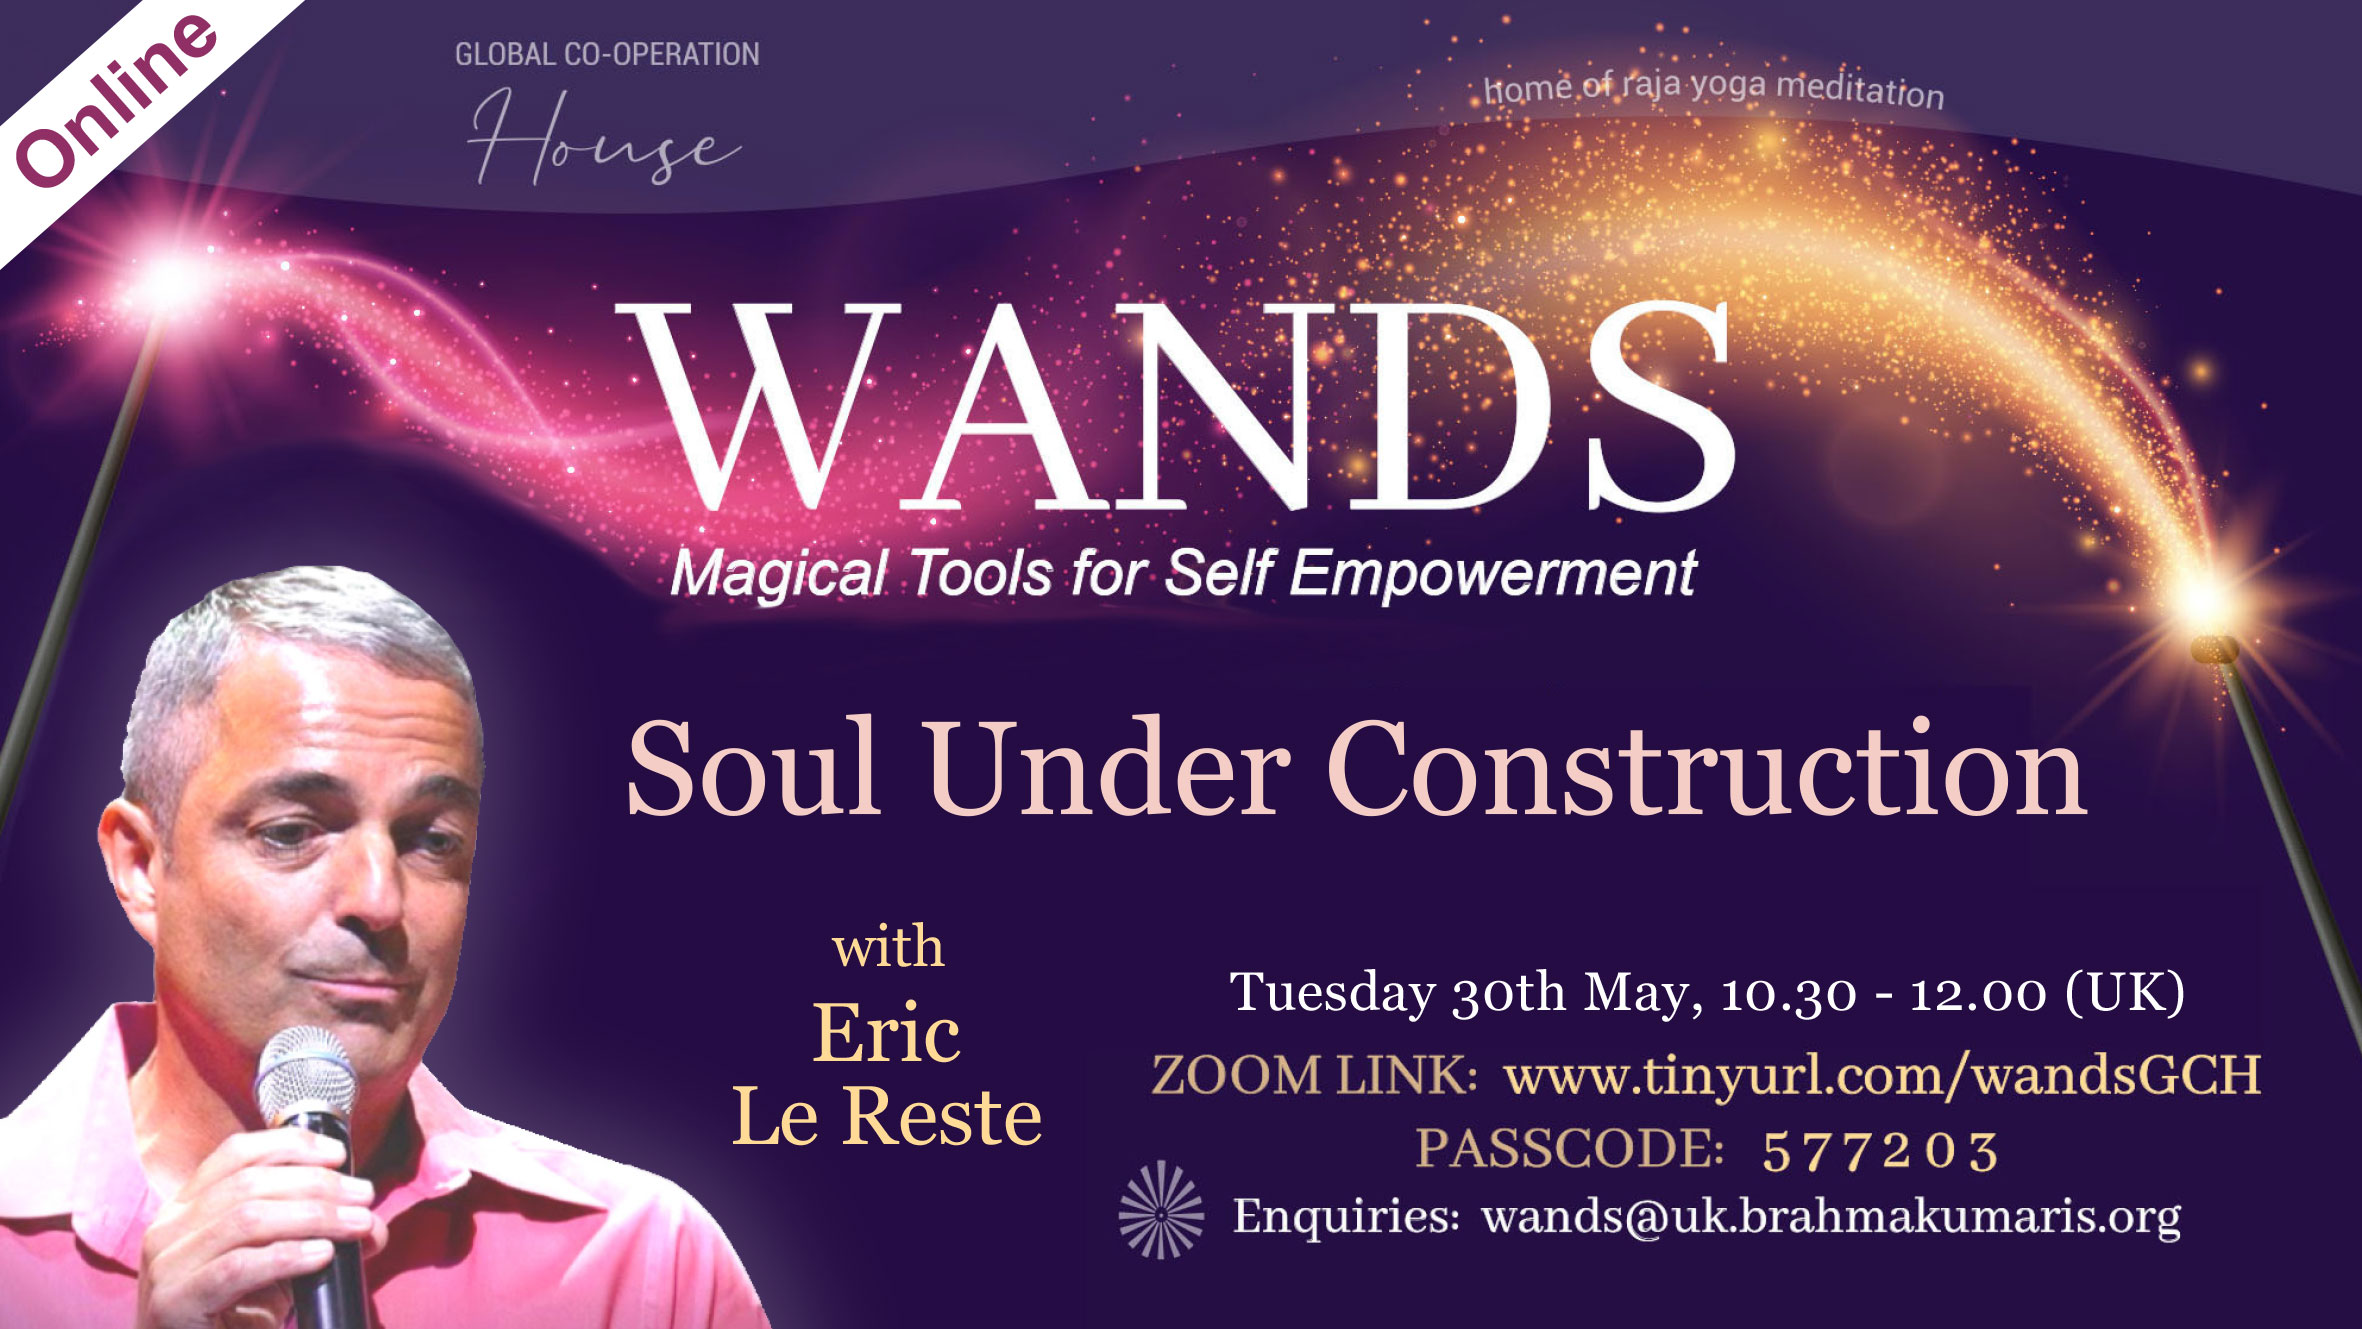 WANDS - Magical Tools for Self Empowerment